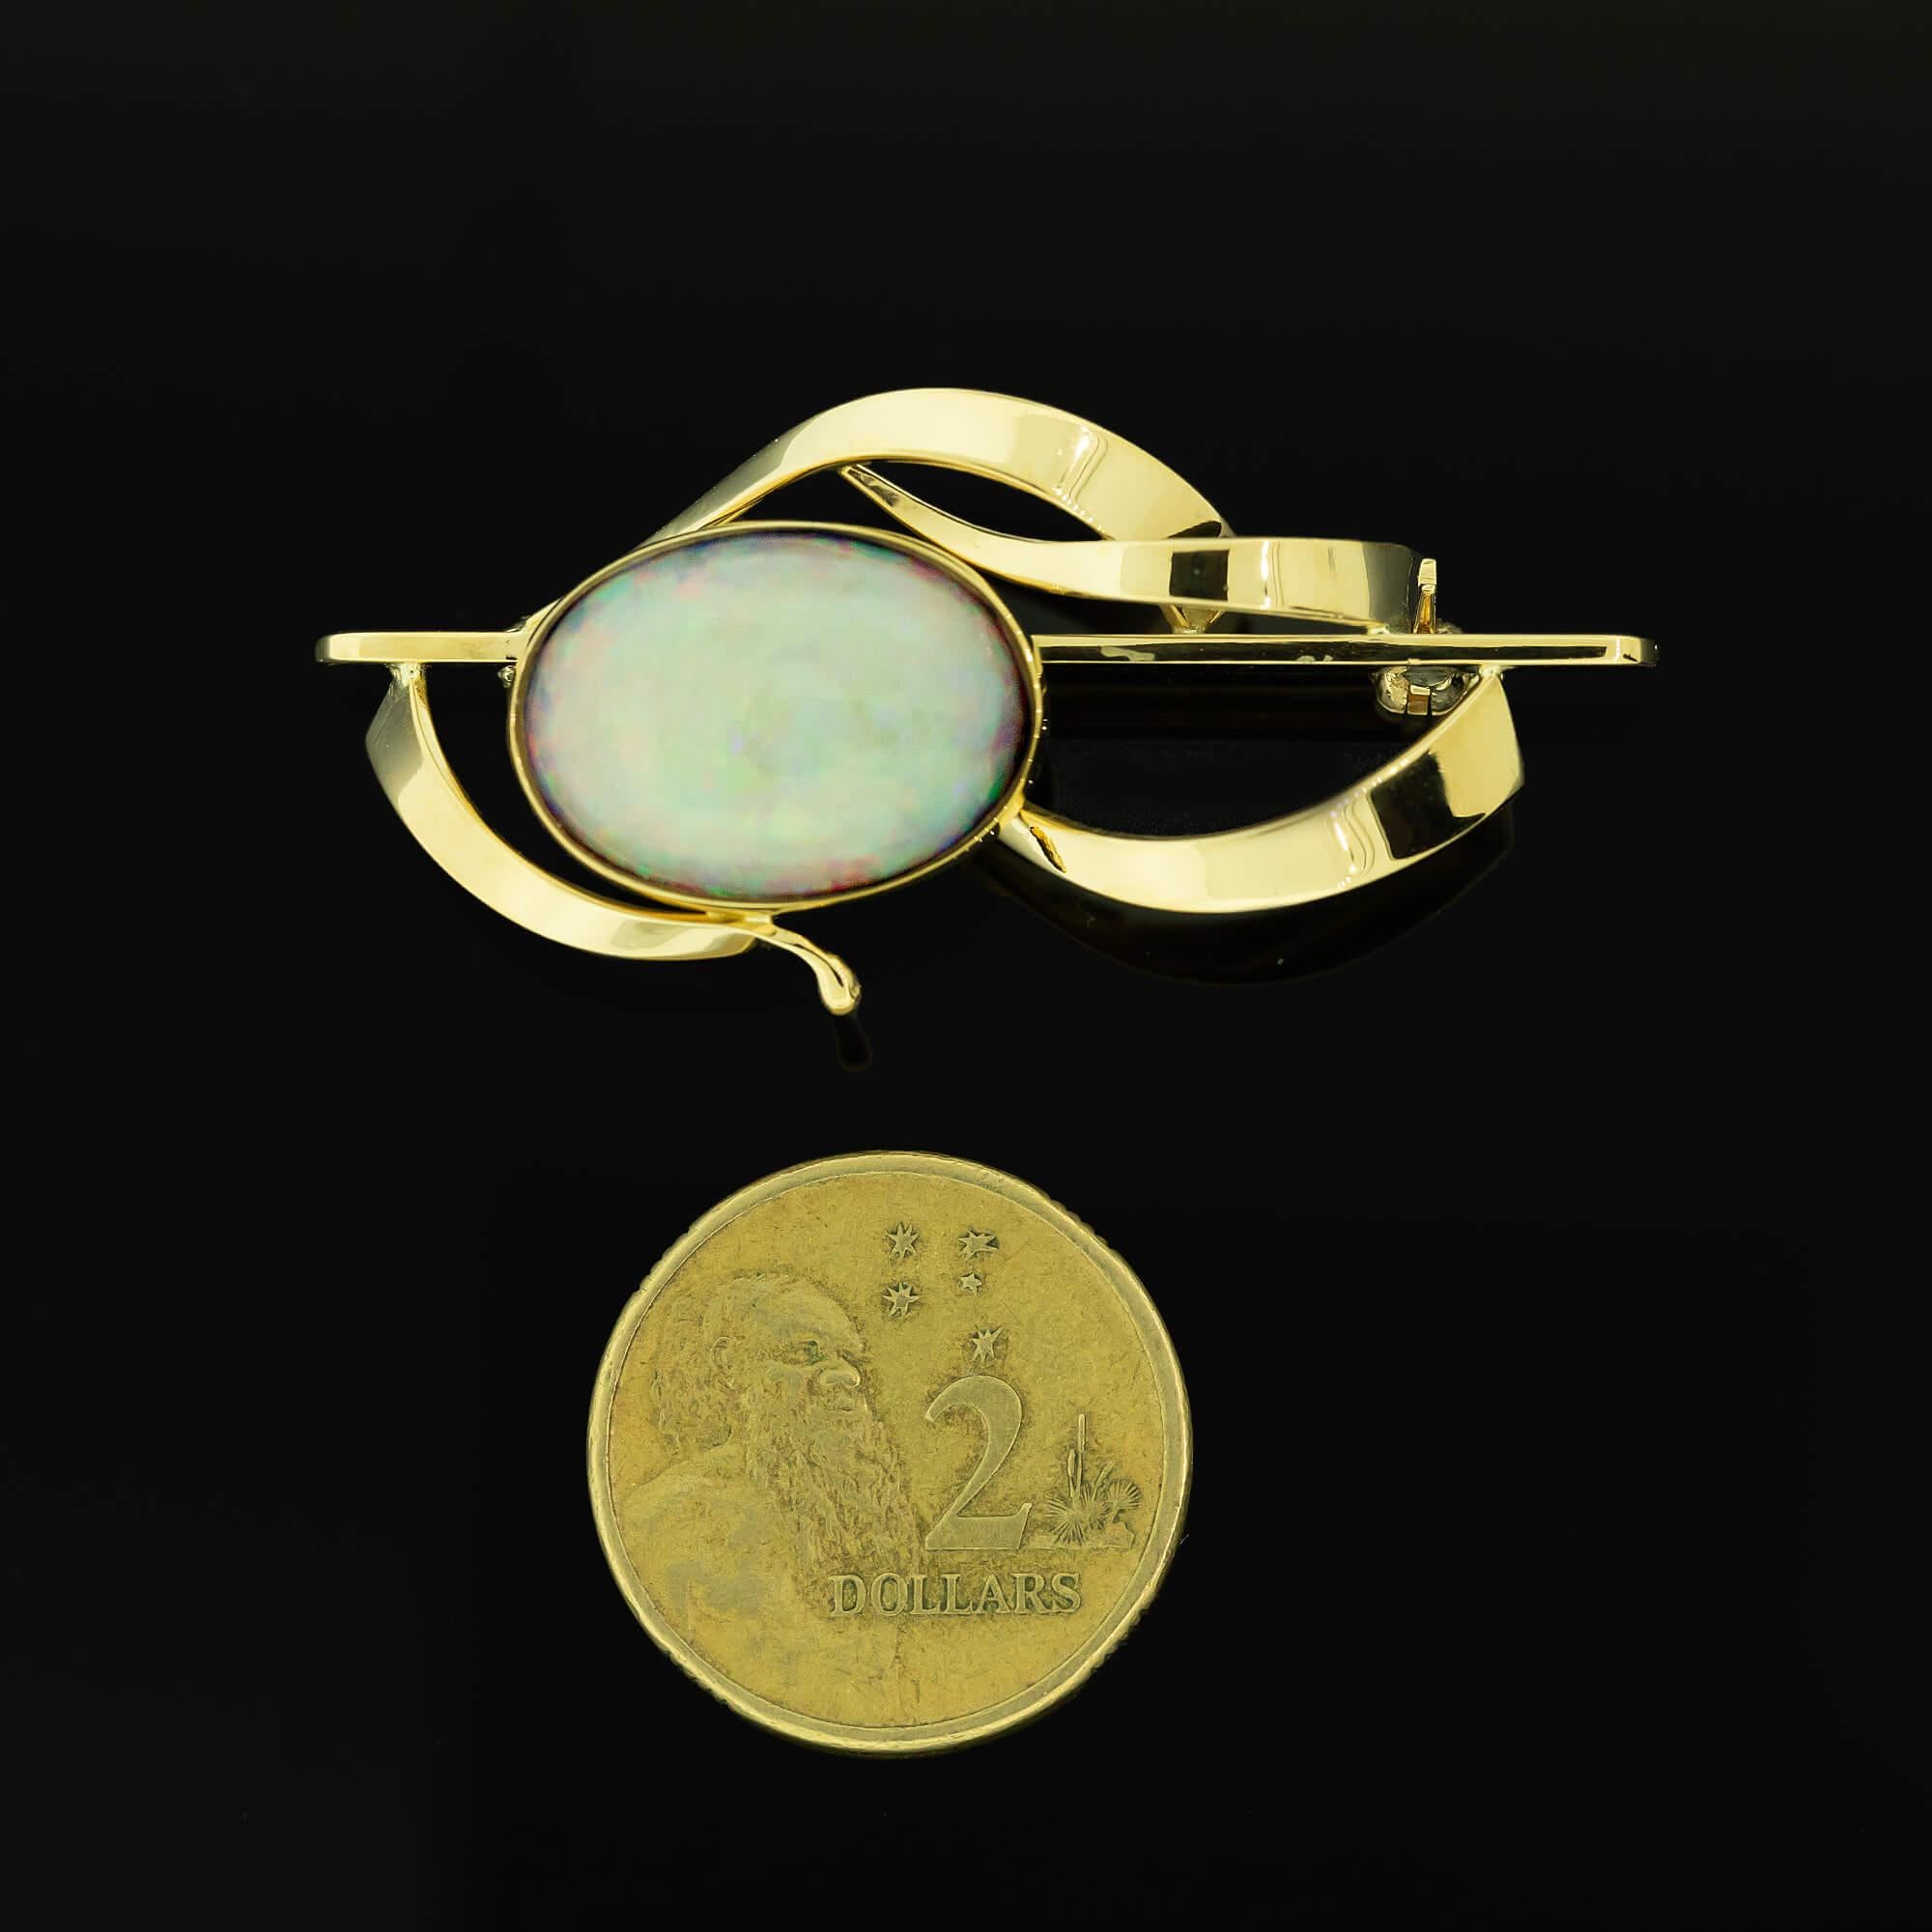 Gold bar brooch with a Coober Pedy solid light opaque opal. The opal is bezel set with curved flat twisting ribbons with a gold pin & roller catch completing the brooch.

Gemstone: Opal, solid light opaque Coober Pedy opal, cabochon cut with a light